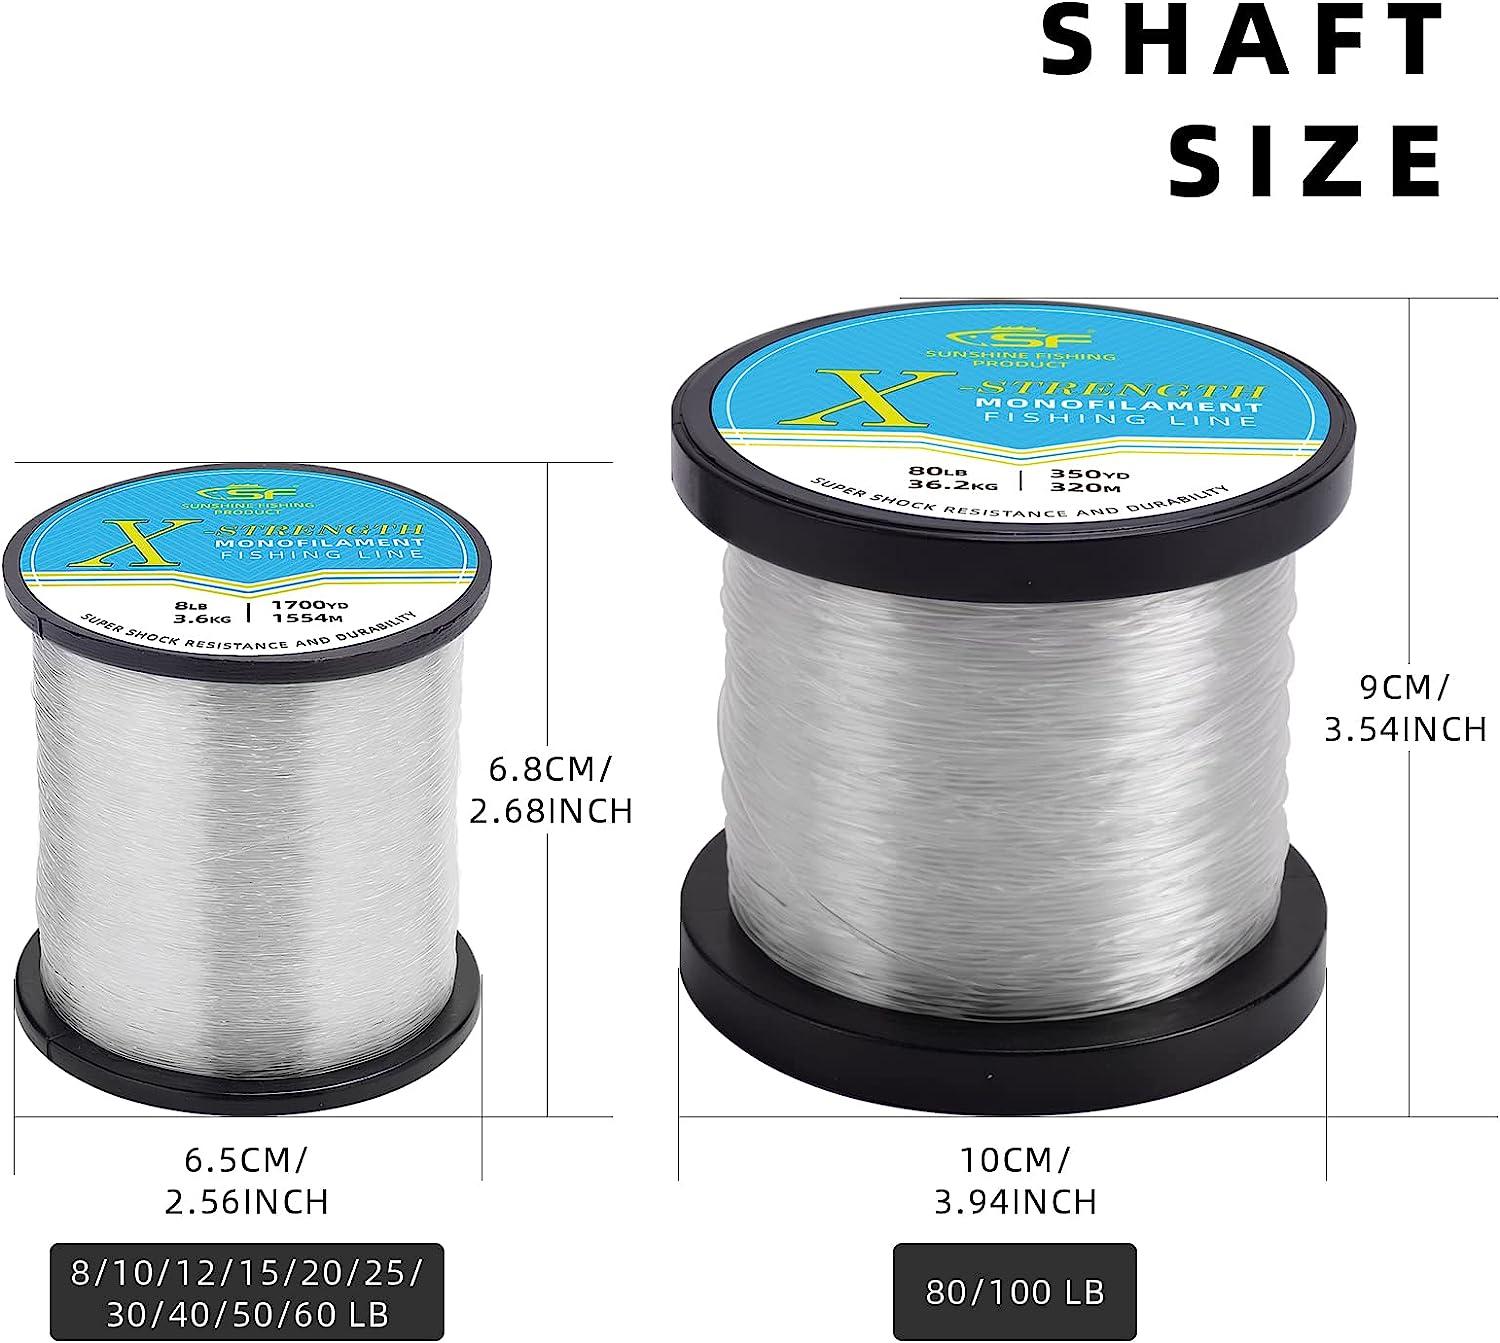 SF Monofilament Fishing Line with Spool Strong Mono Nylon Leader Line 8/10/ 12/15/20/25/30/40/50/60/80/100LB Clear/Green Fishing Wire Saltwater  Freshwater for Hanging Decorations Sewing Craft Balloons Clear  30LB/0.55mm/440Yds